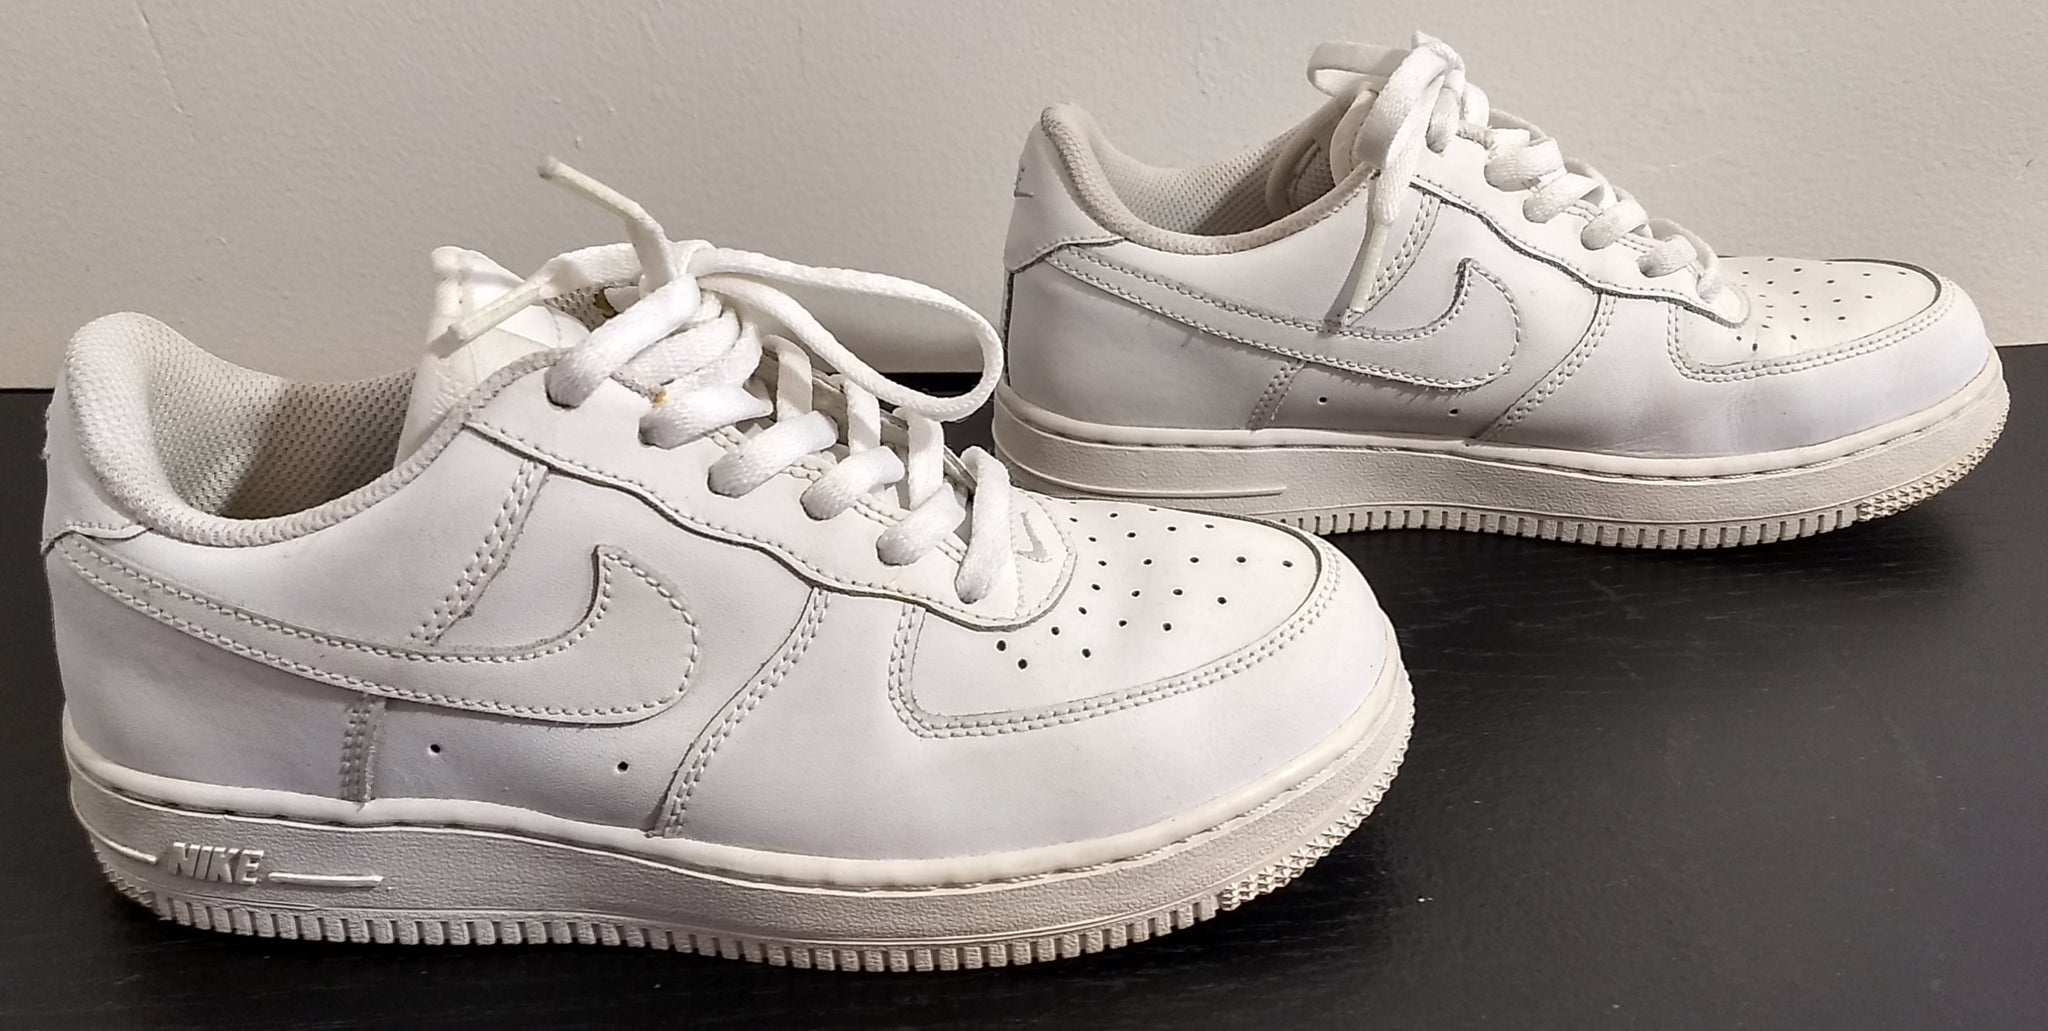 infant air force 1 size 3